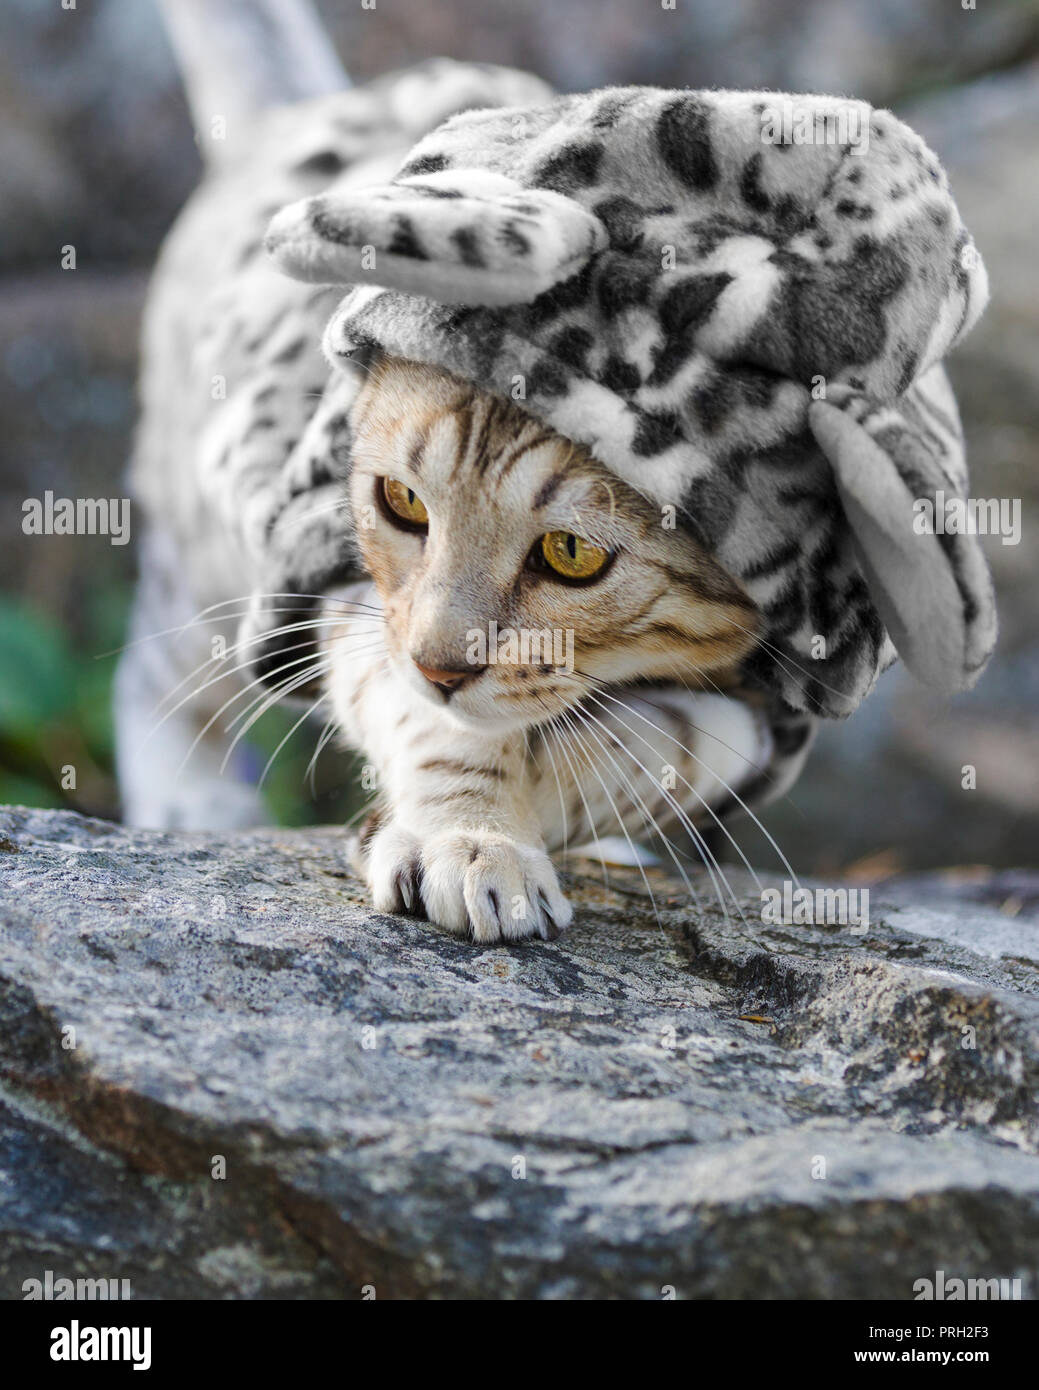 Cute young male Bengal cat dressed up in leopard print outfit outdoors Stock Photo